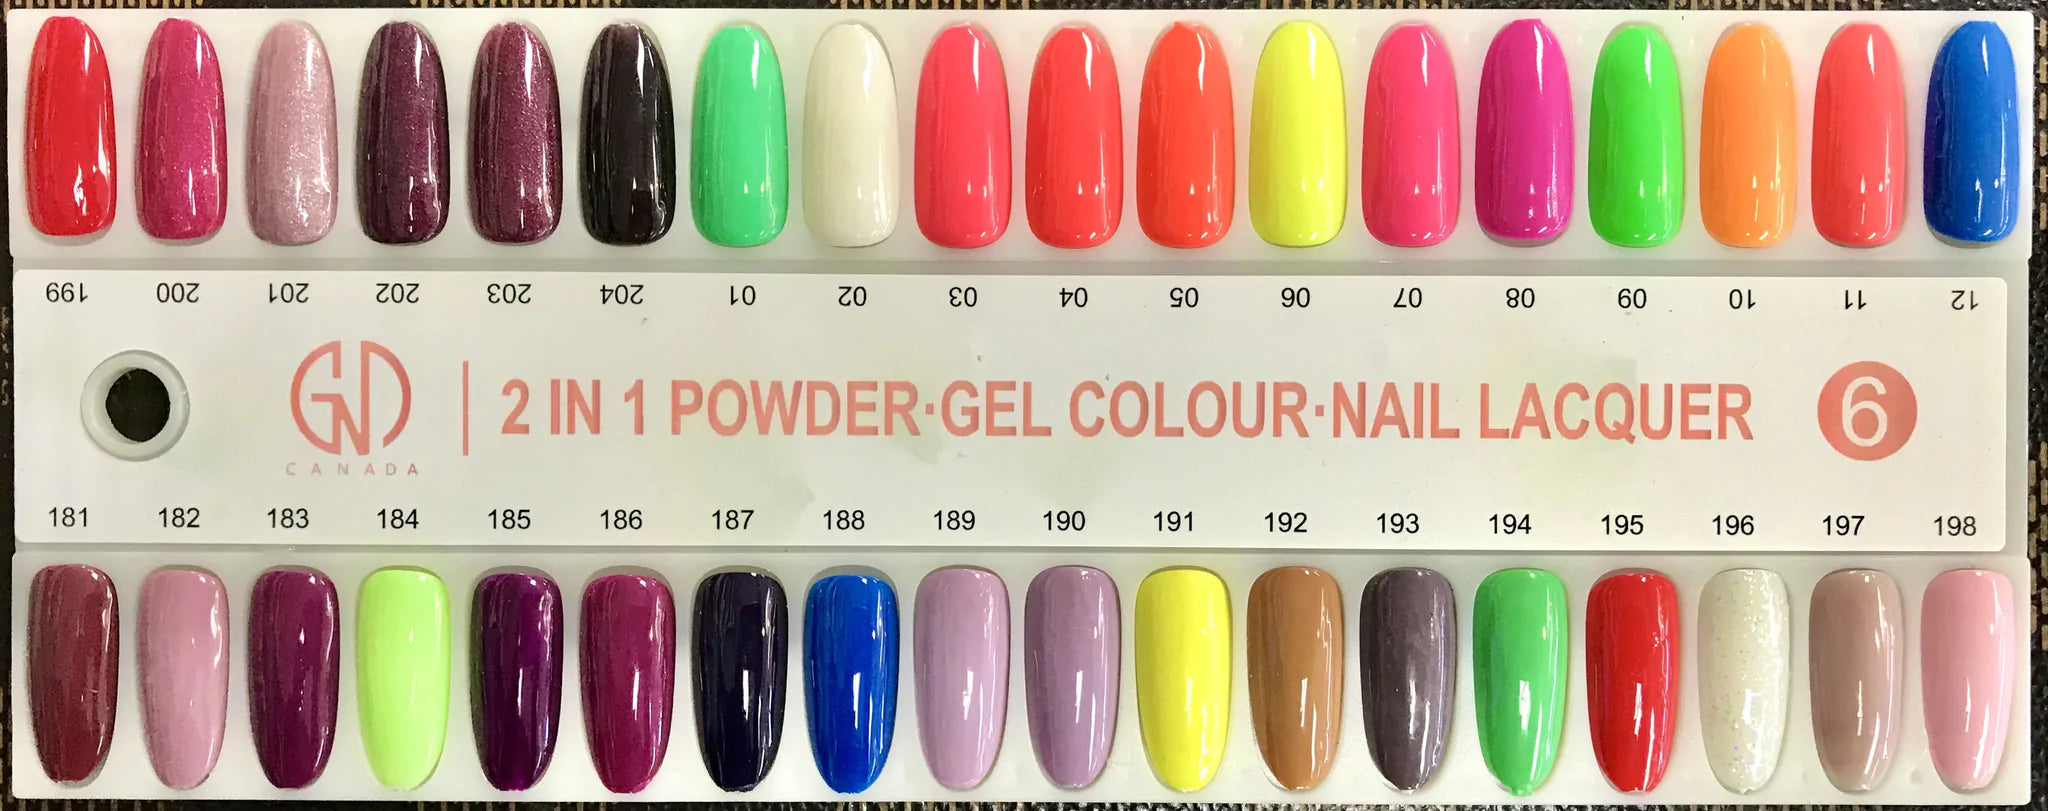 GND Duo Gel & Lacquer 182